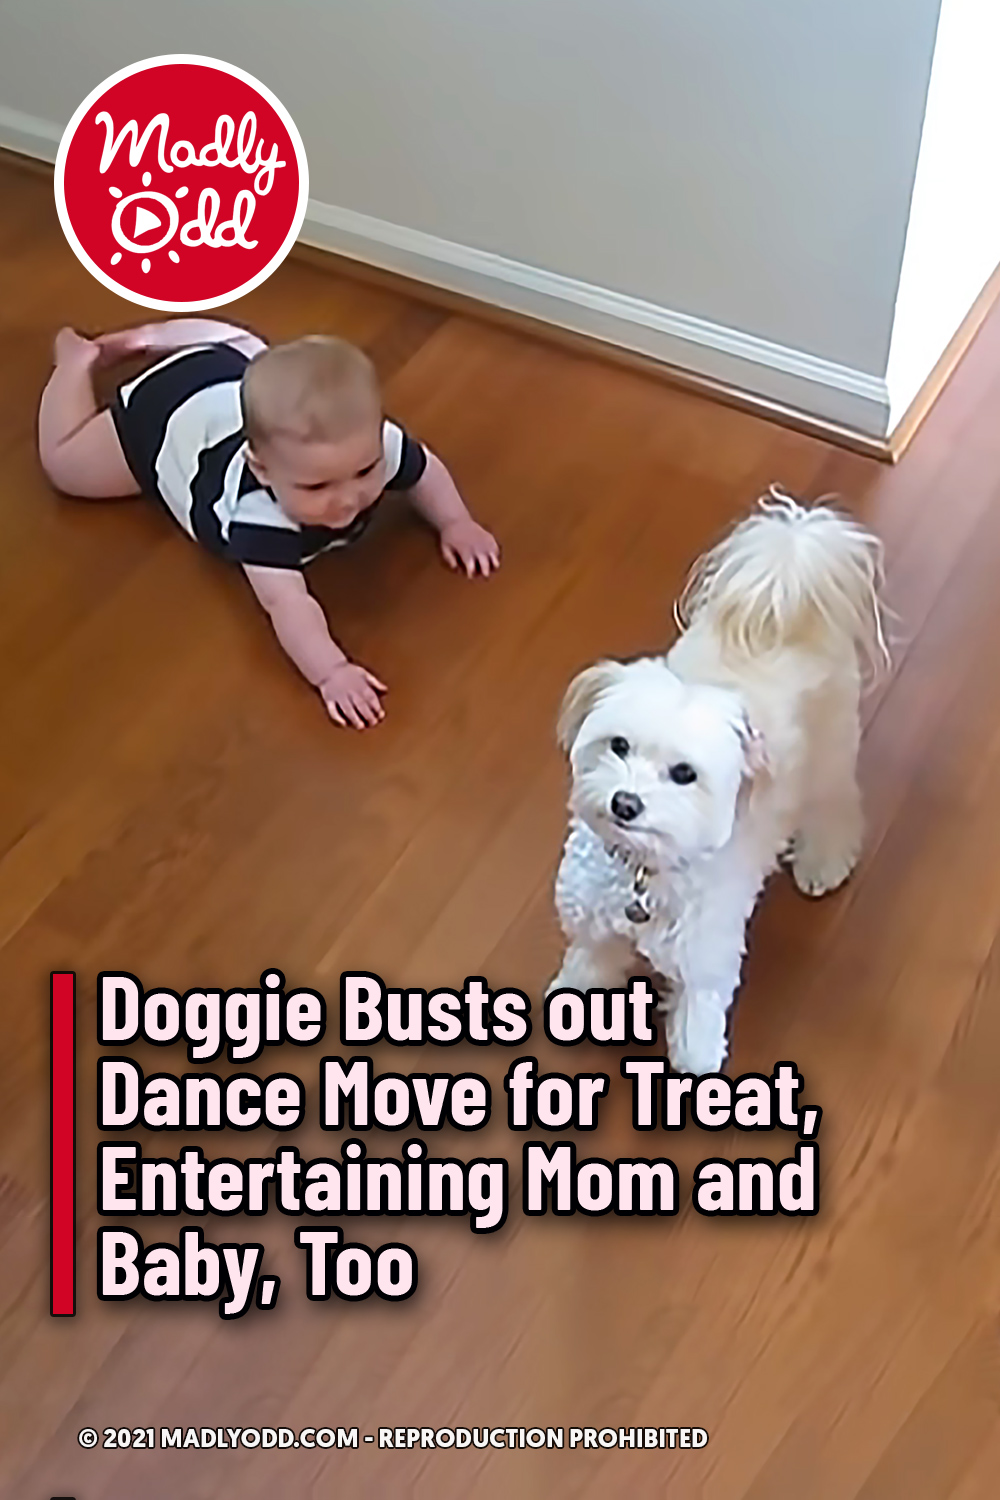 Doggie Busts Out Dance Move for Treat, Entertaining Mom and Baby, Too